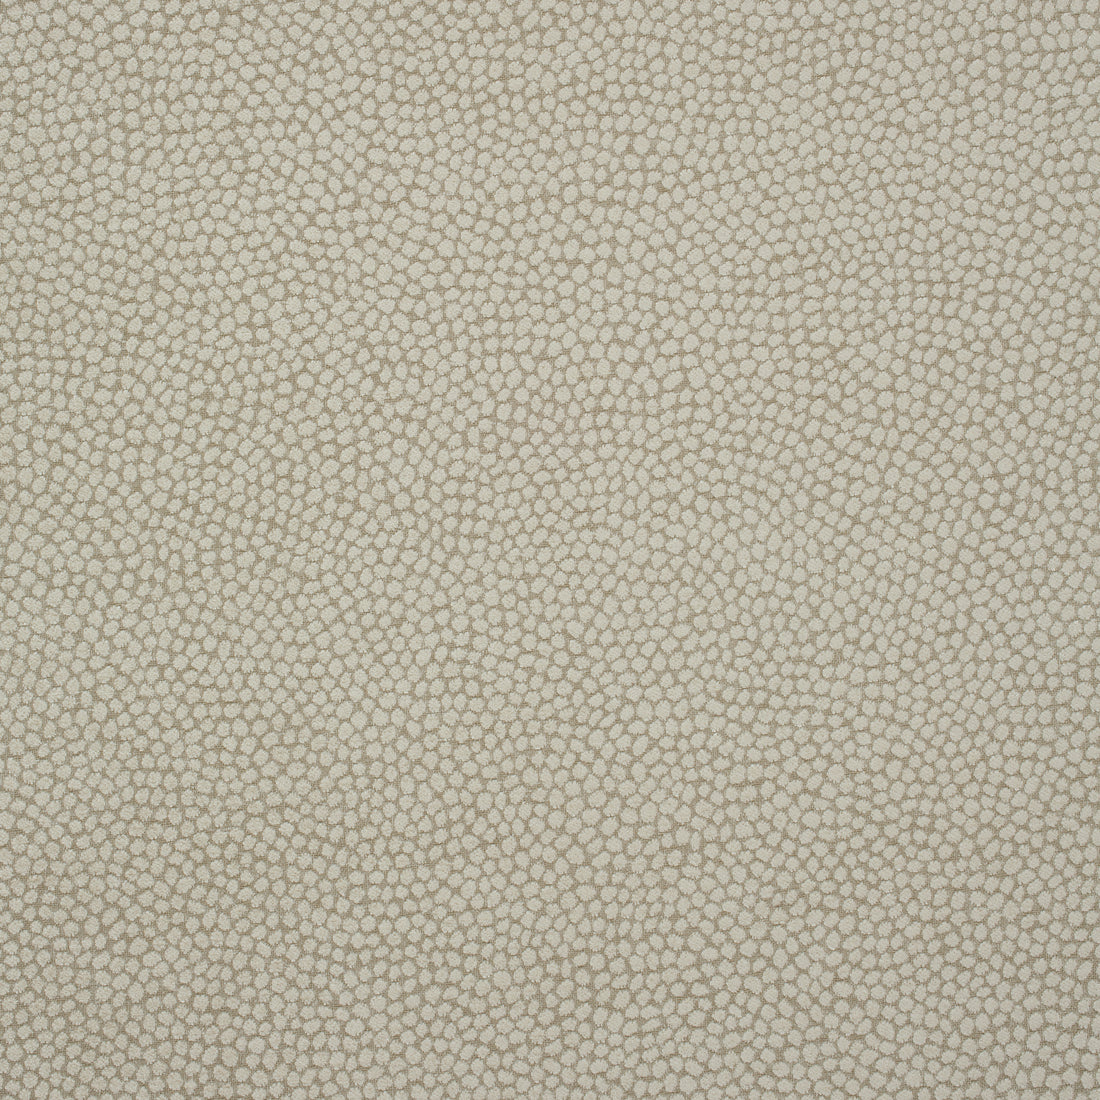 Kali fabric in flax color - pattern number W80516 - by Thibaut in the Mosaic collection